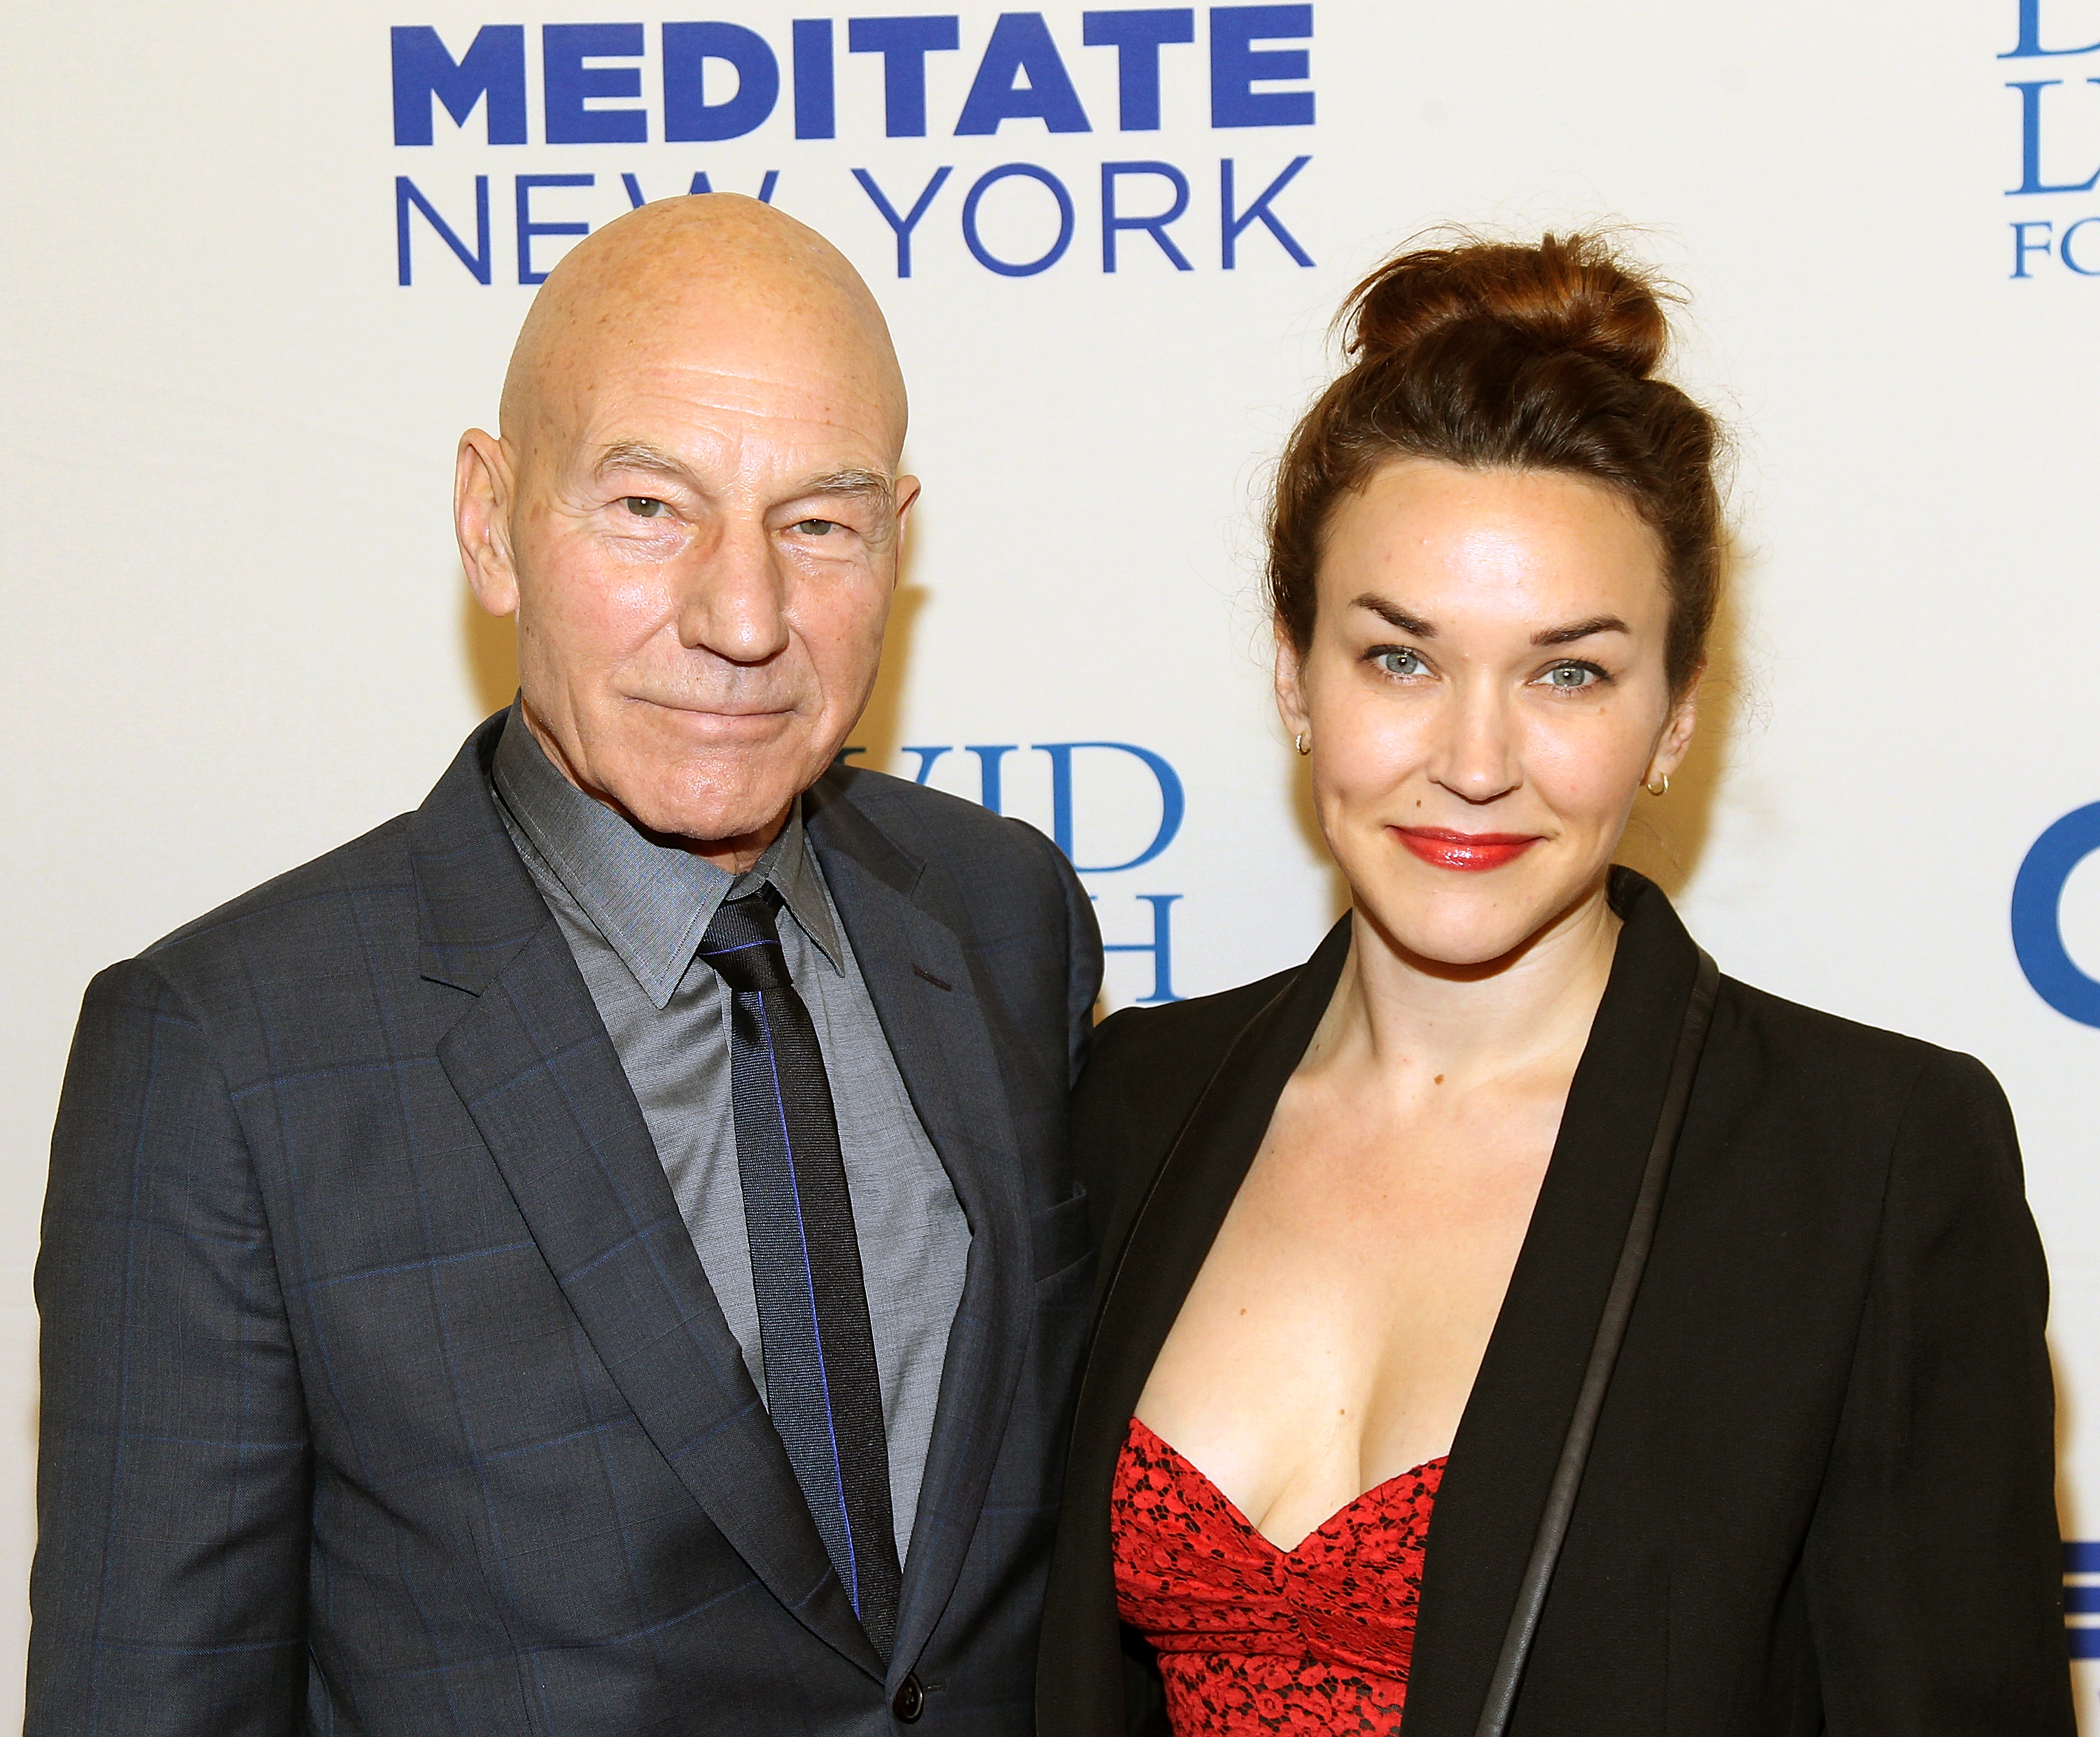 Patrick Stewart and Sunny Ozell at the "Change Begins Within: A David Lynch Foundation Benefit Concert" in New York City on November 4, 2015 | Source: Getty Images